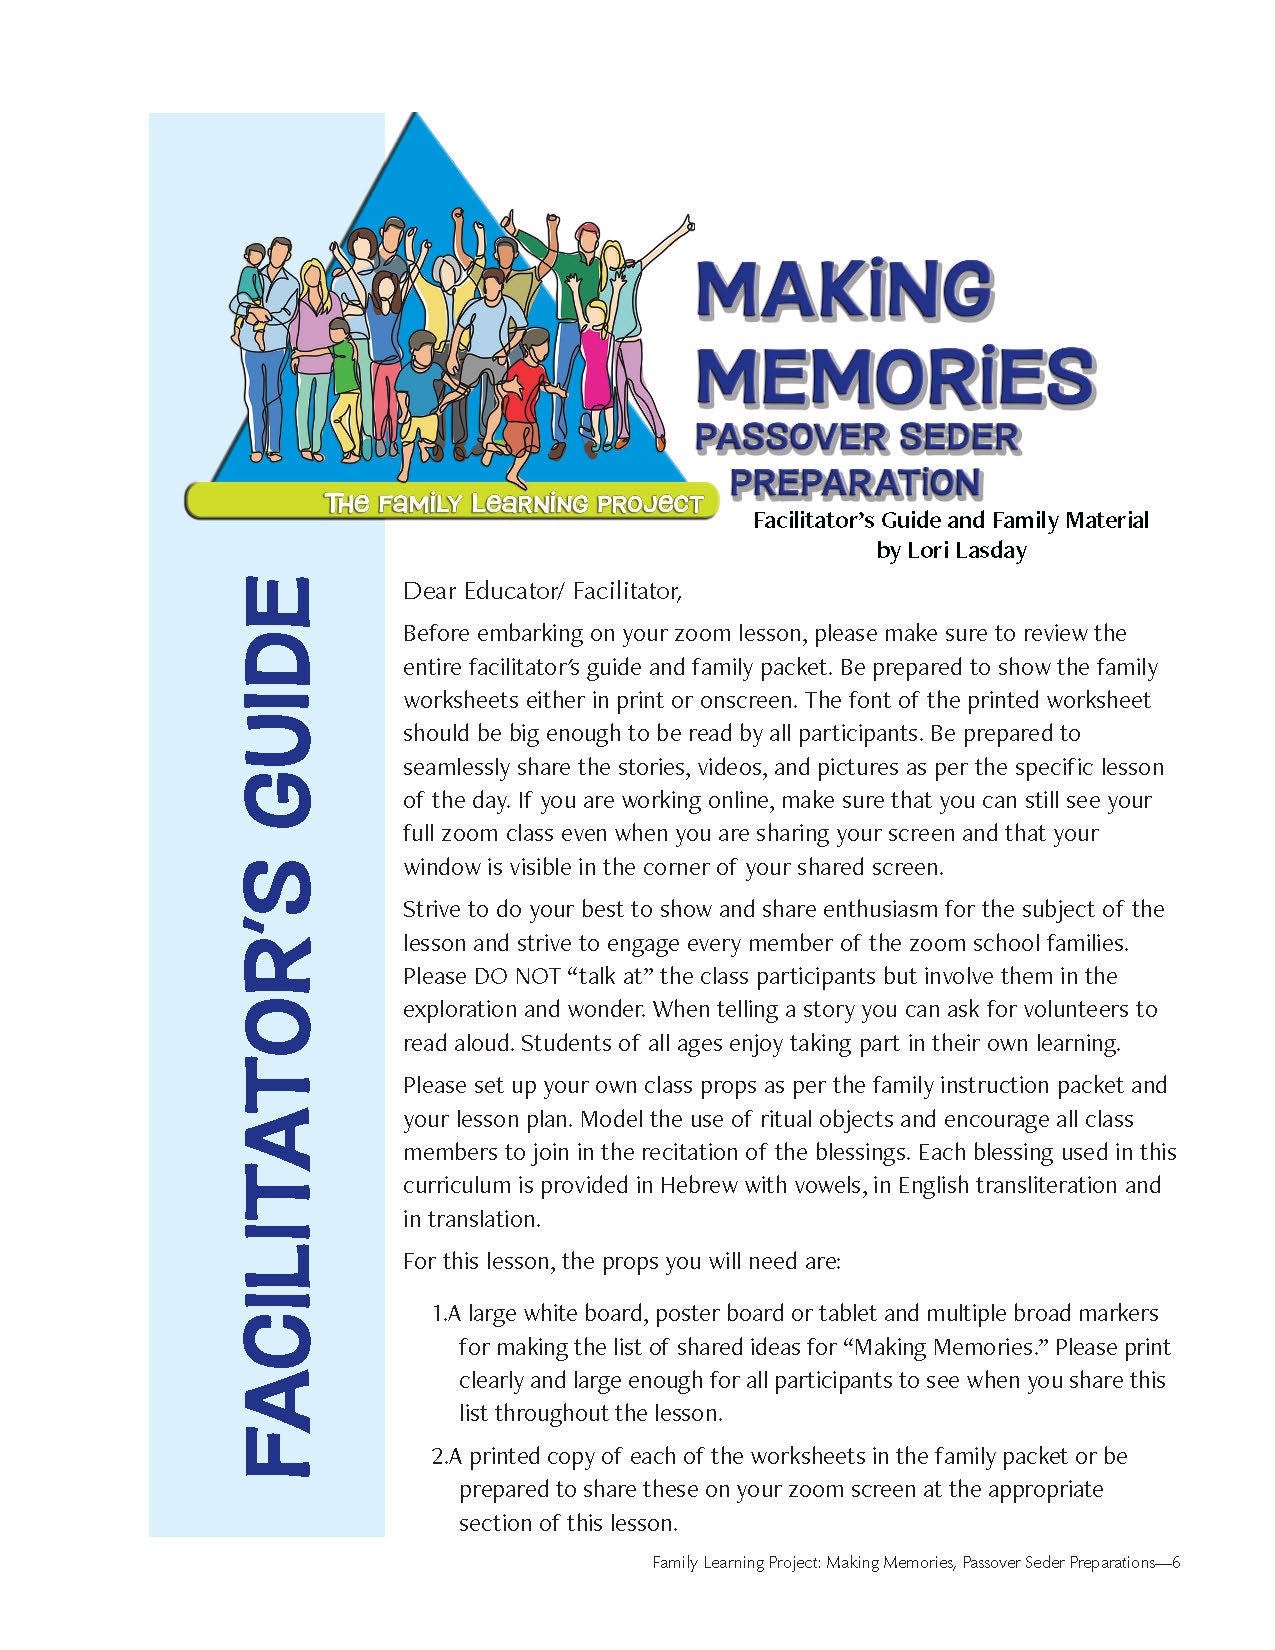 Family Learning Project: Making Memories: Passover Seder Preparations